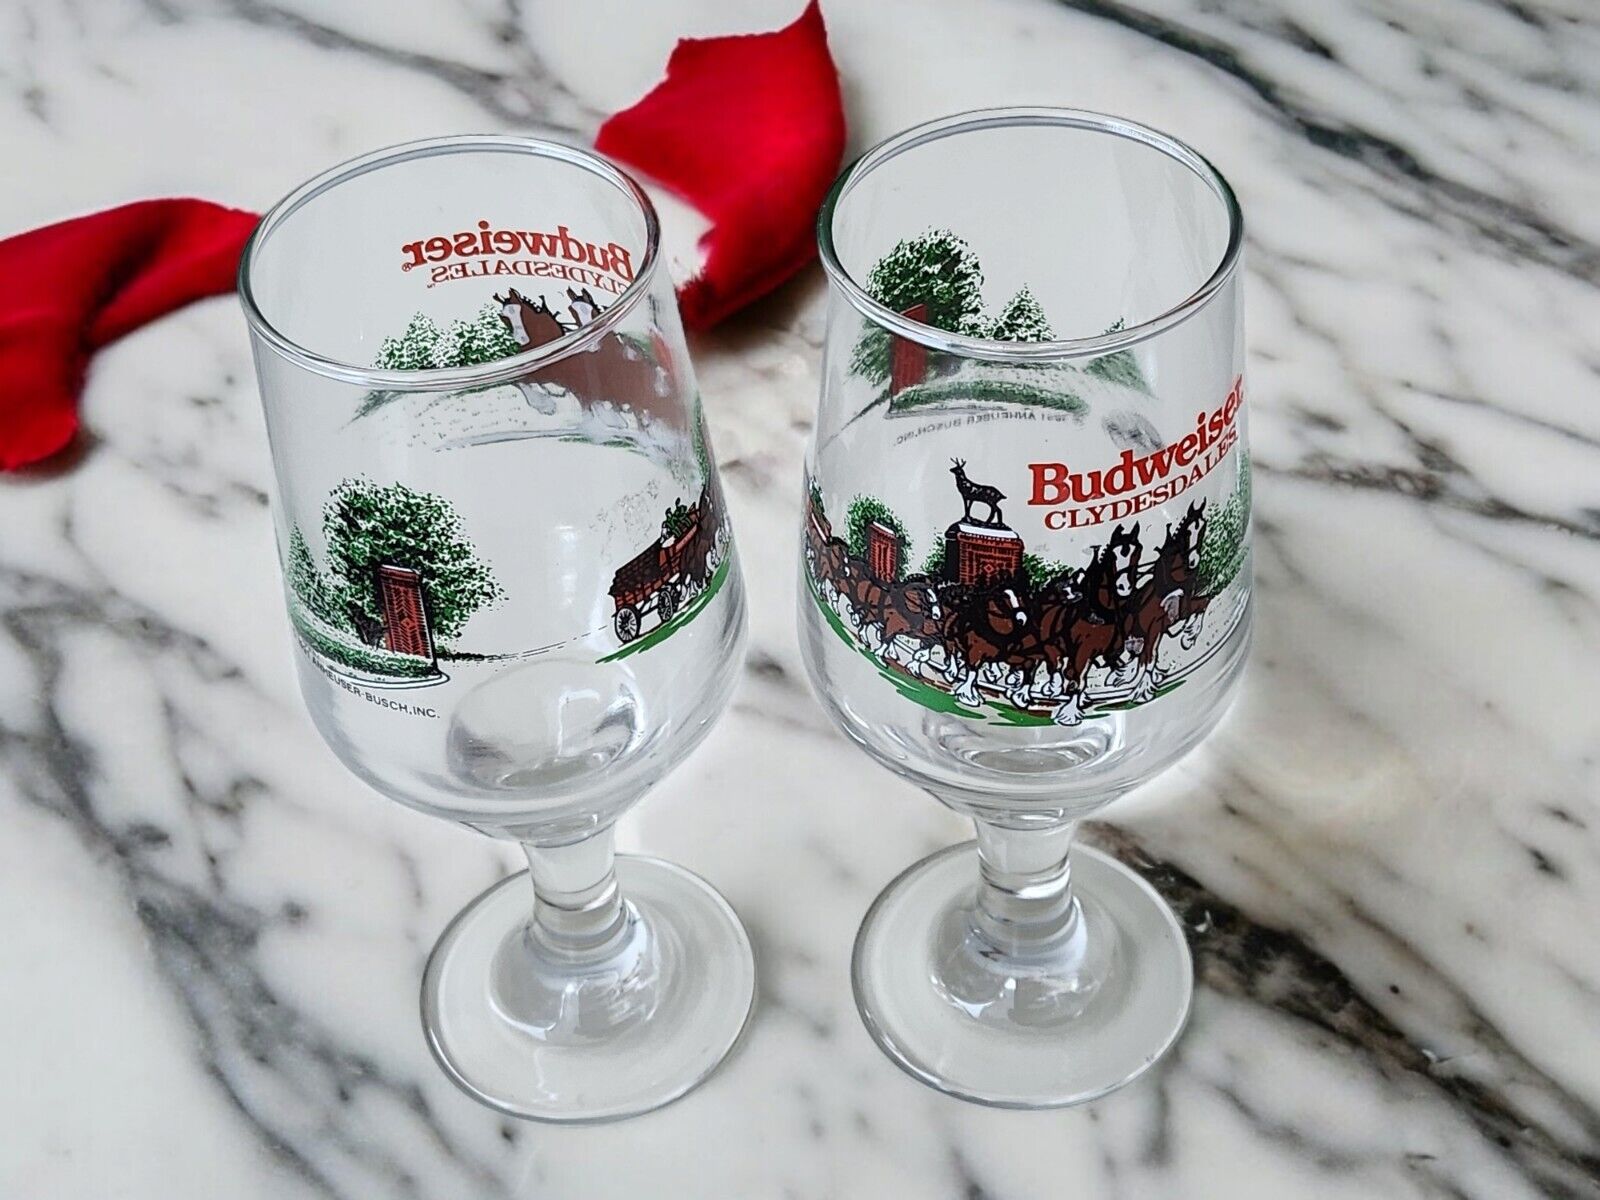 Budweiser Clydesdales Beer Glasses Goblets Stemmed 1991 Official Product Pair X2